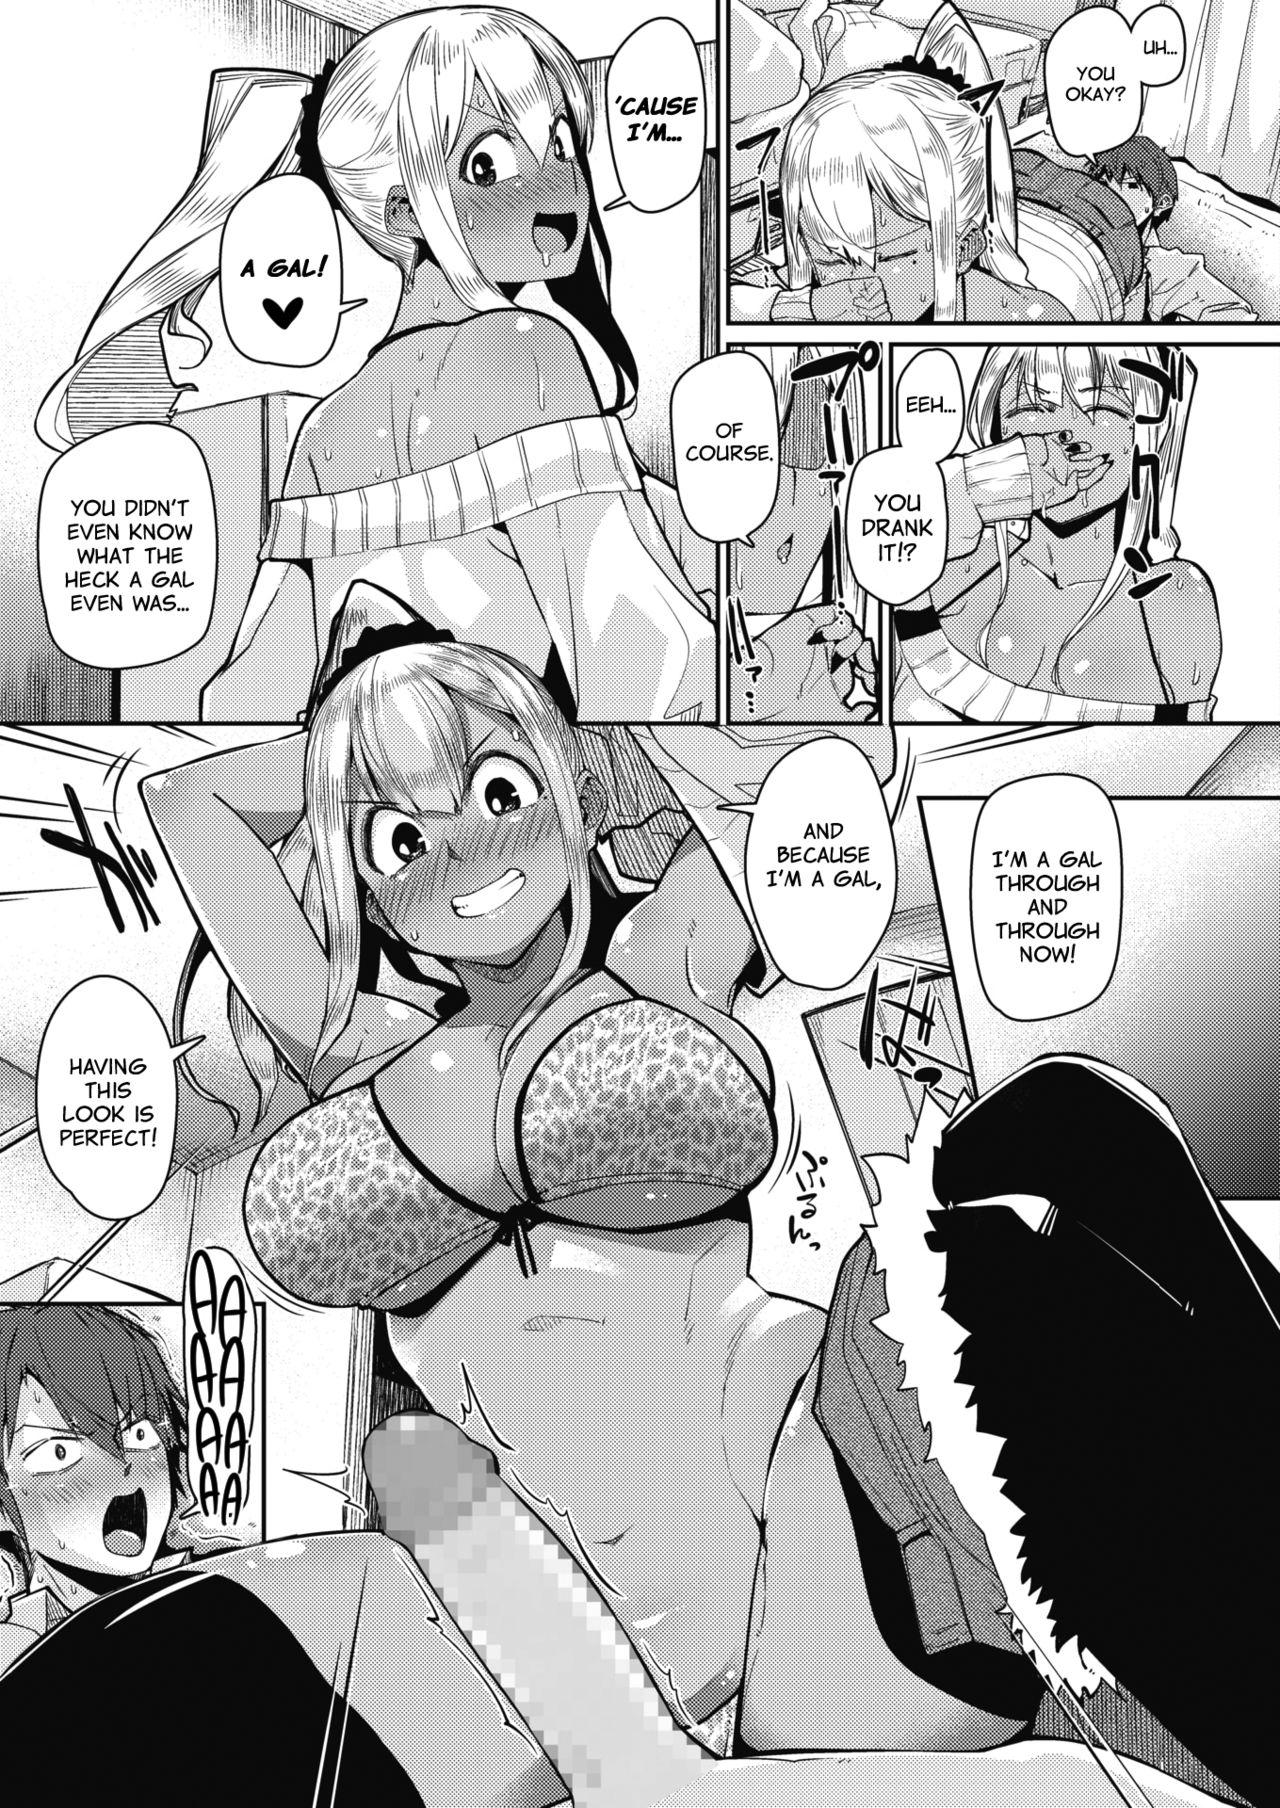 Sapphicerotica Gekkan "Za Bicchi" wo Mita Onna no Hannou ni Tsuite | About the Reaction of the Girl Who Saw "The Bitch Monthly" Passivo - Page 11